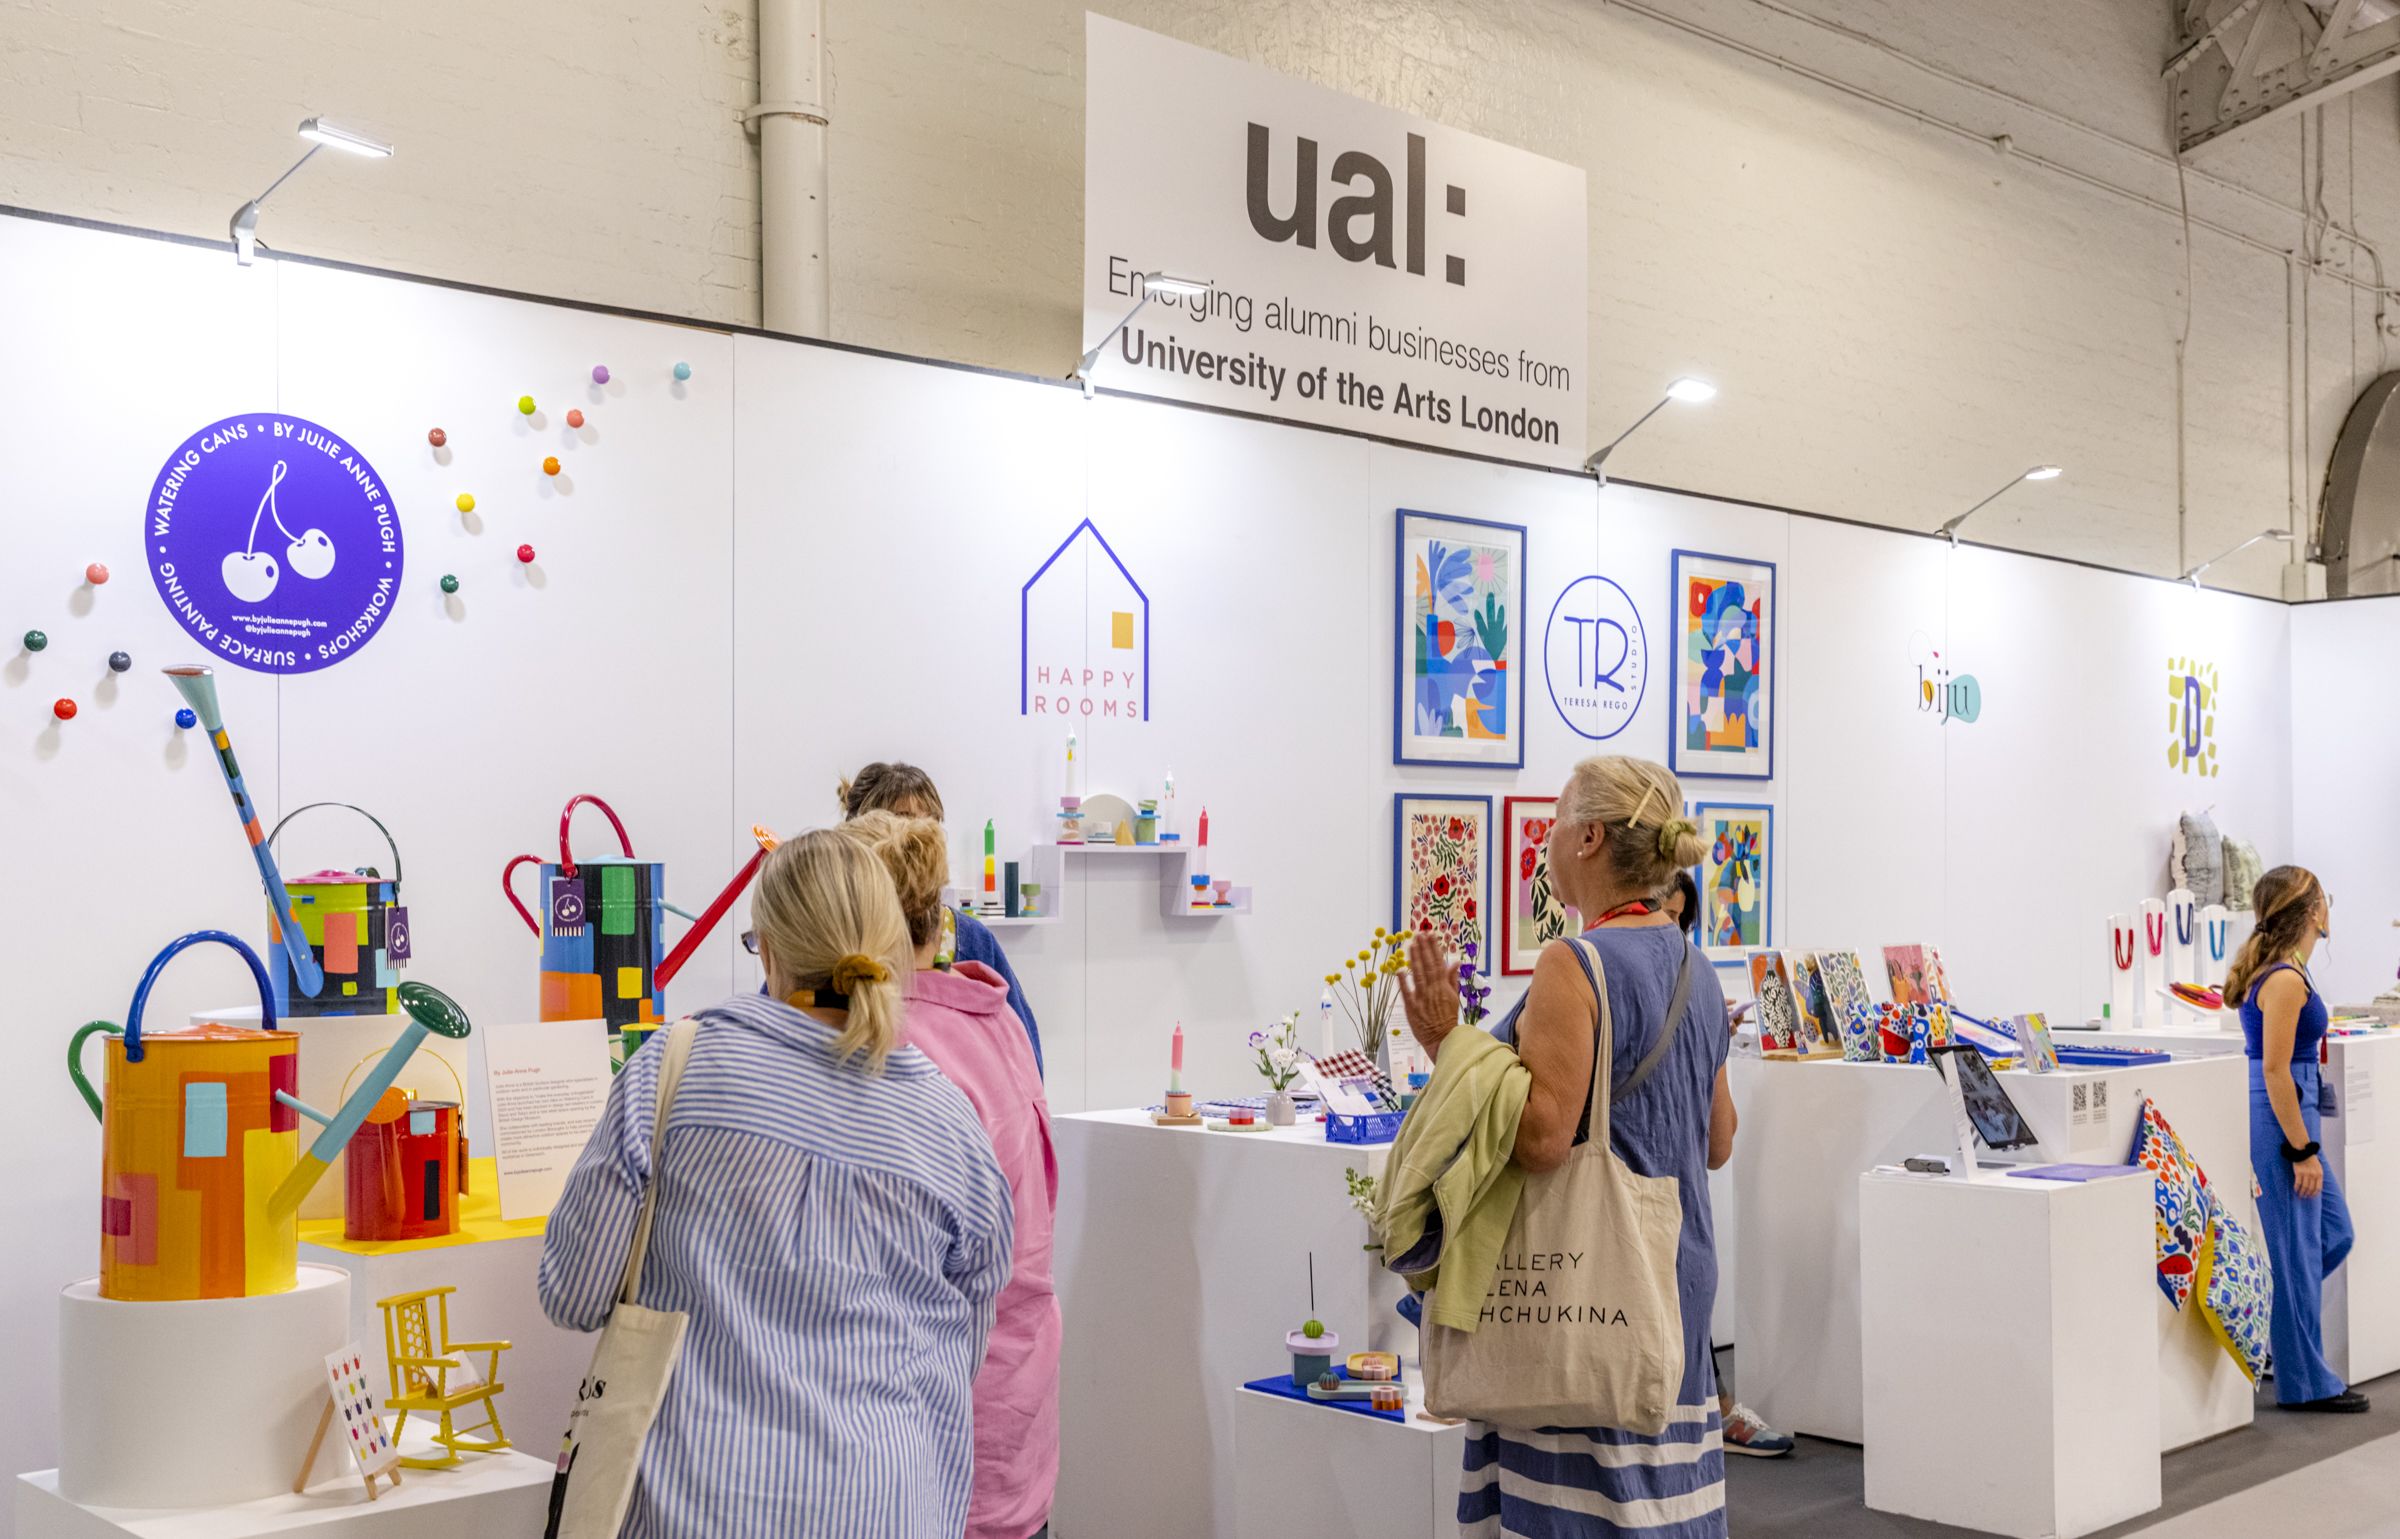 The UAL stand at Top Drawer, people are standing in the foreground looking at colourful products on display.